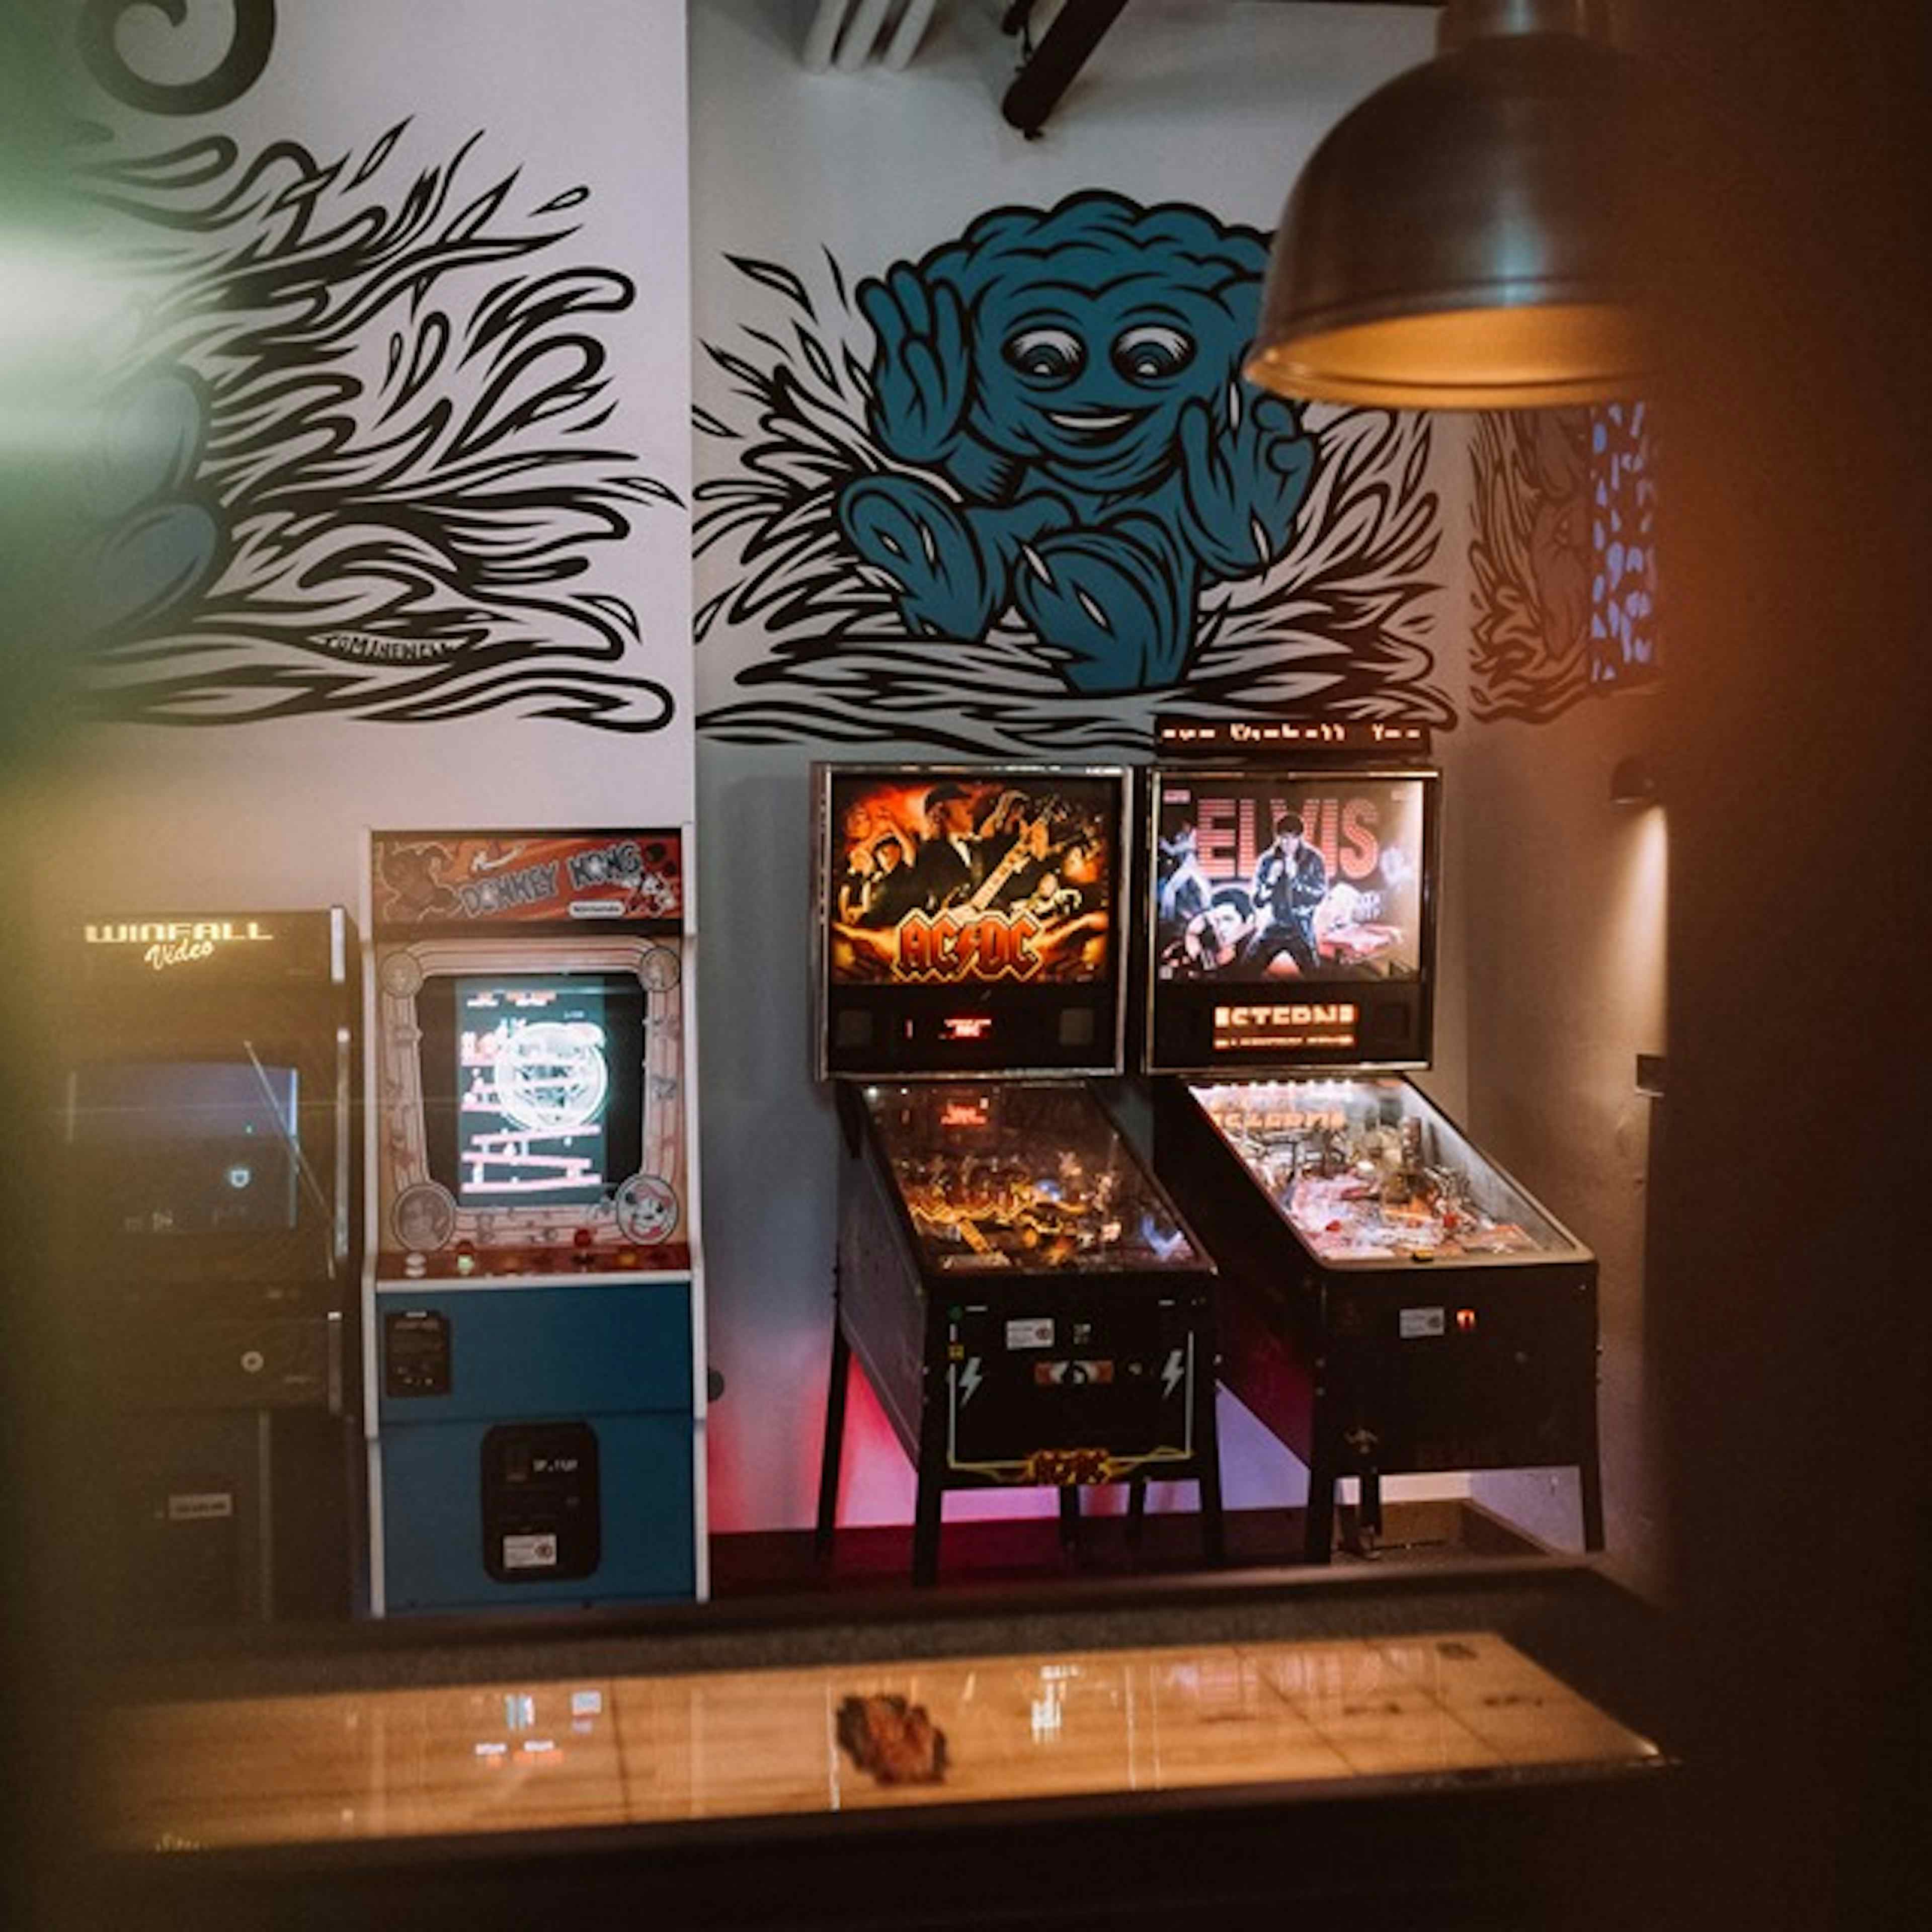 Head of Steam - Games Room image 3